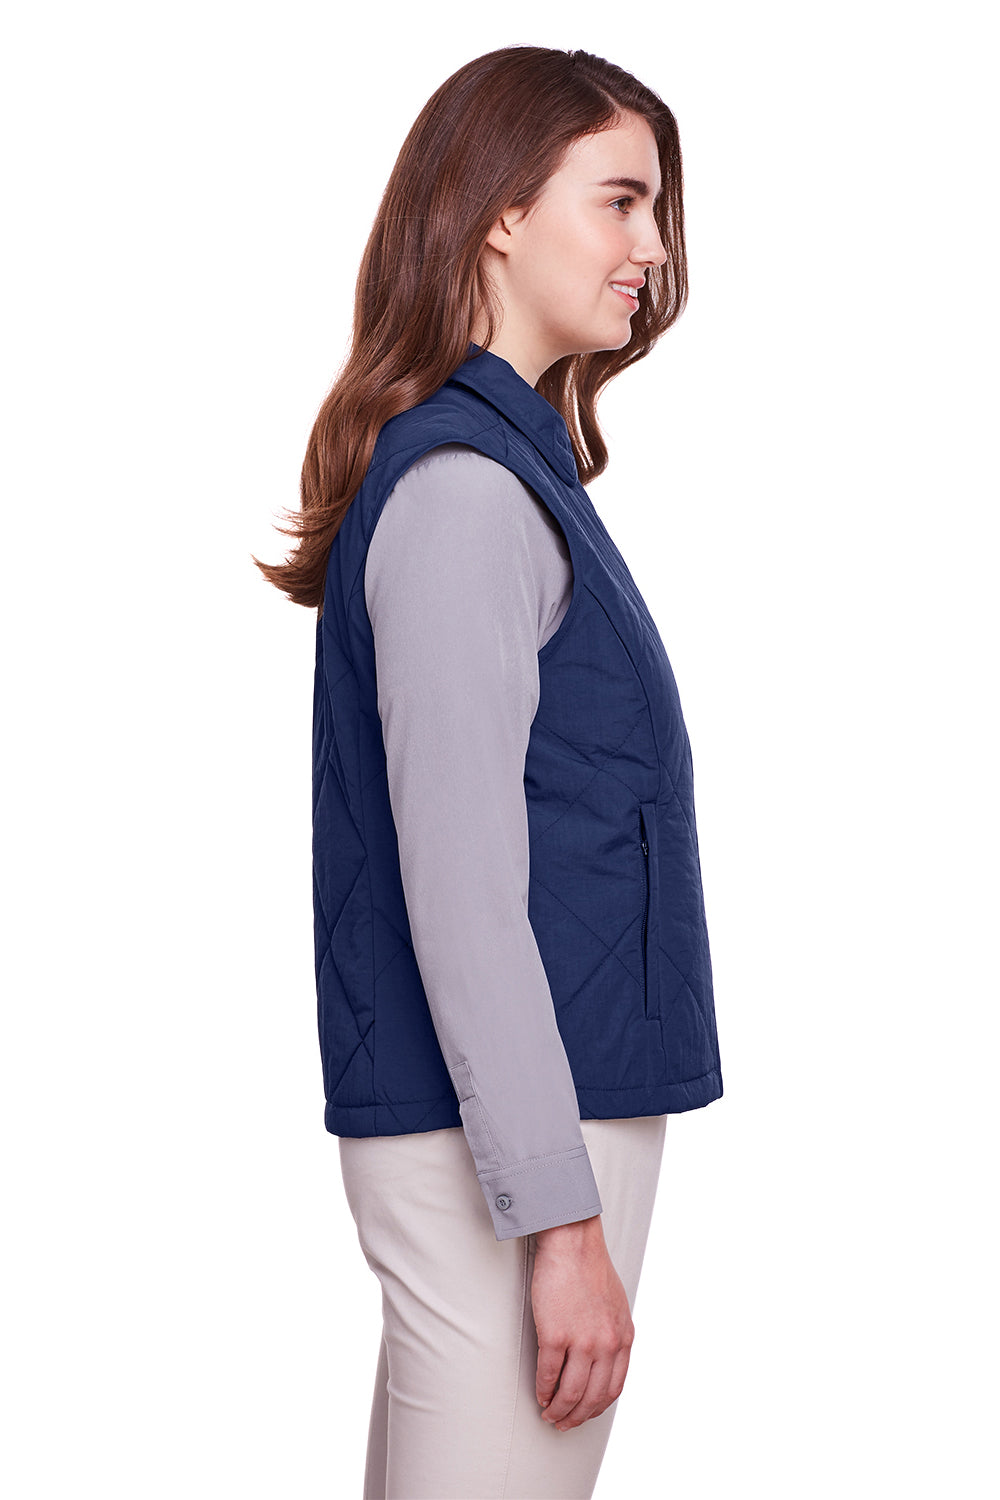 UltraClub UC709W Womens Dawson Quilted Full Zip Vest Navy Blue Side